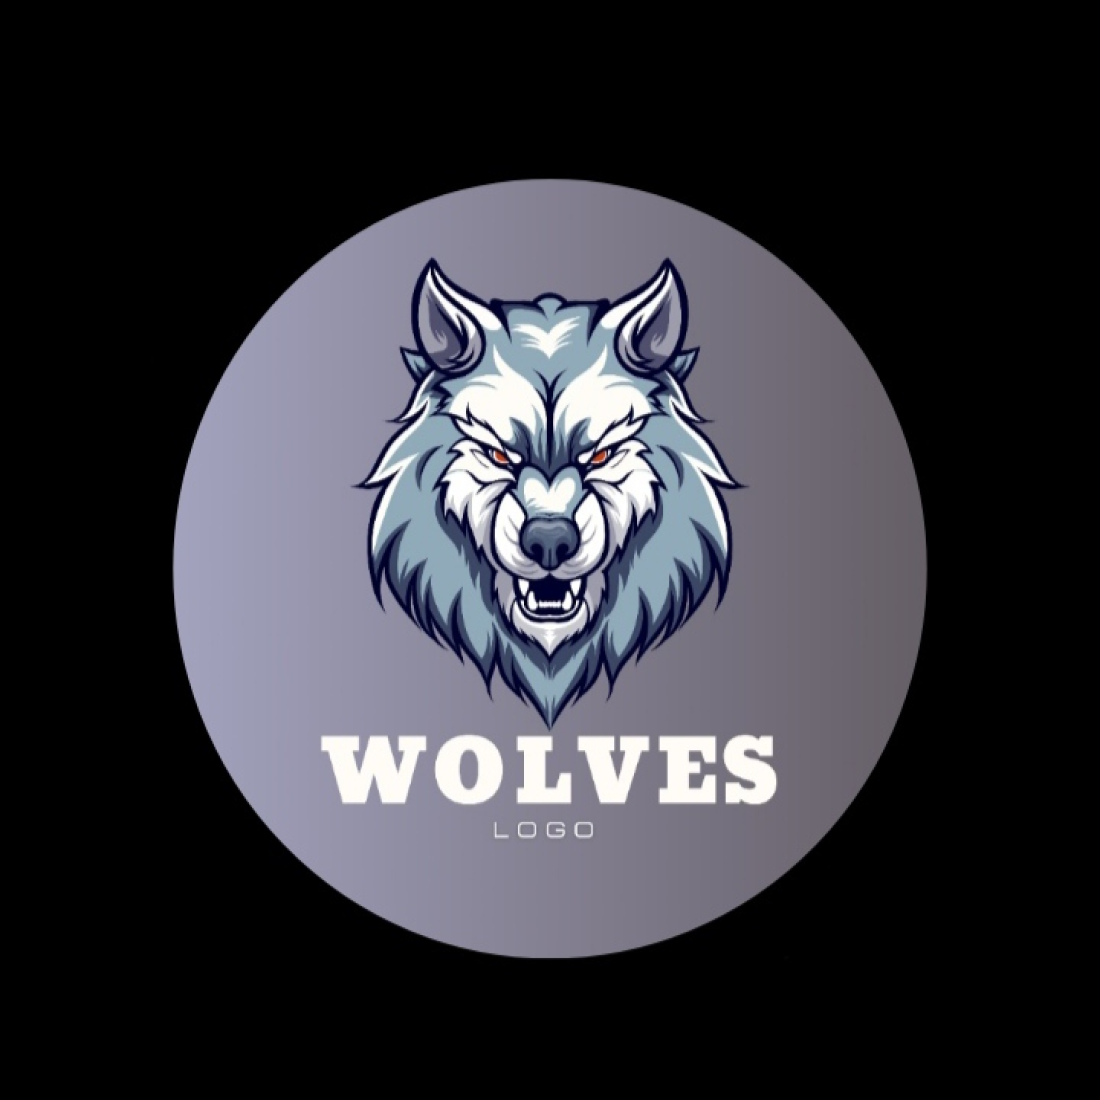 Wolves logo preview image.